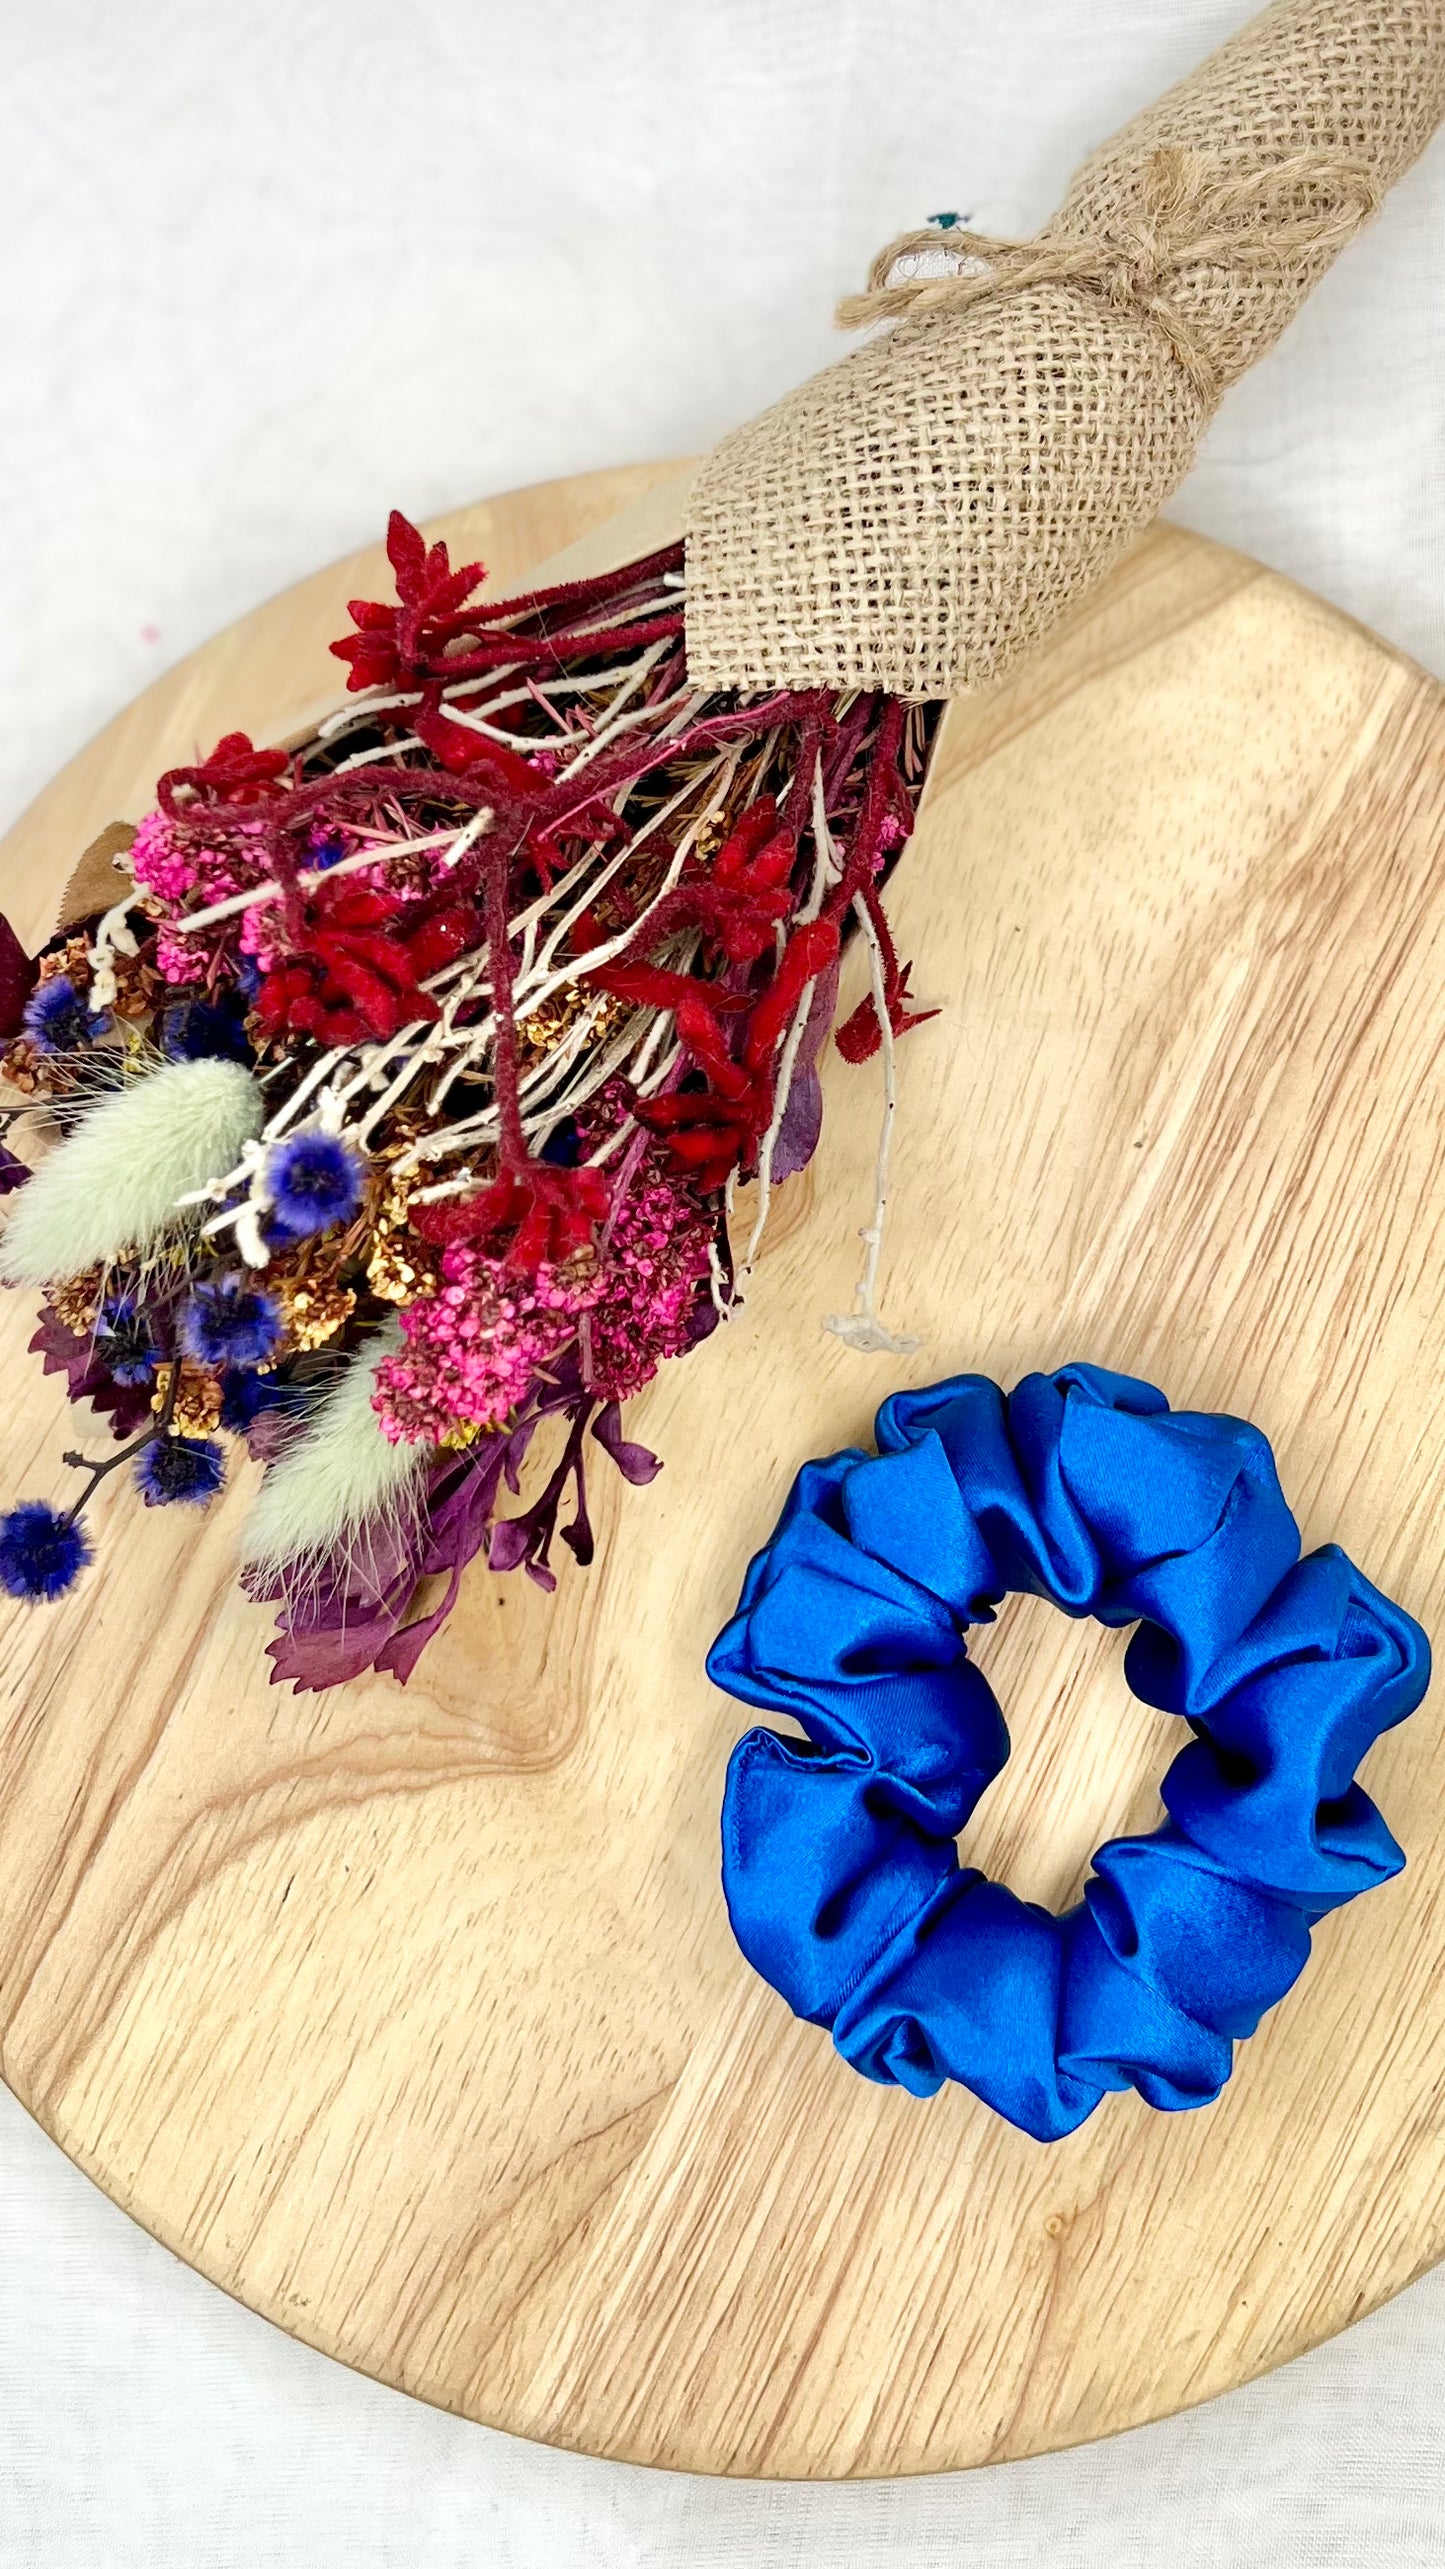 Berry Sweet Regular Satin Scrunchies: Satin scrunchies are our top seller, a crowd favourite! Super stretchy and comfortable to wear - you won't be disappointed! This scrunchie comes in a variety of gorg - Ciao Bella Dresses 